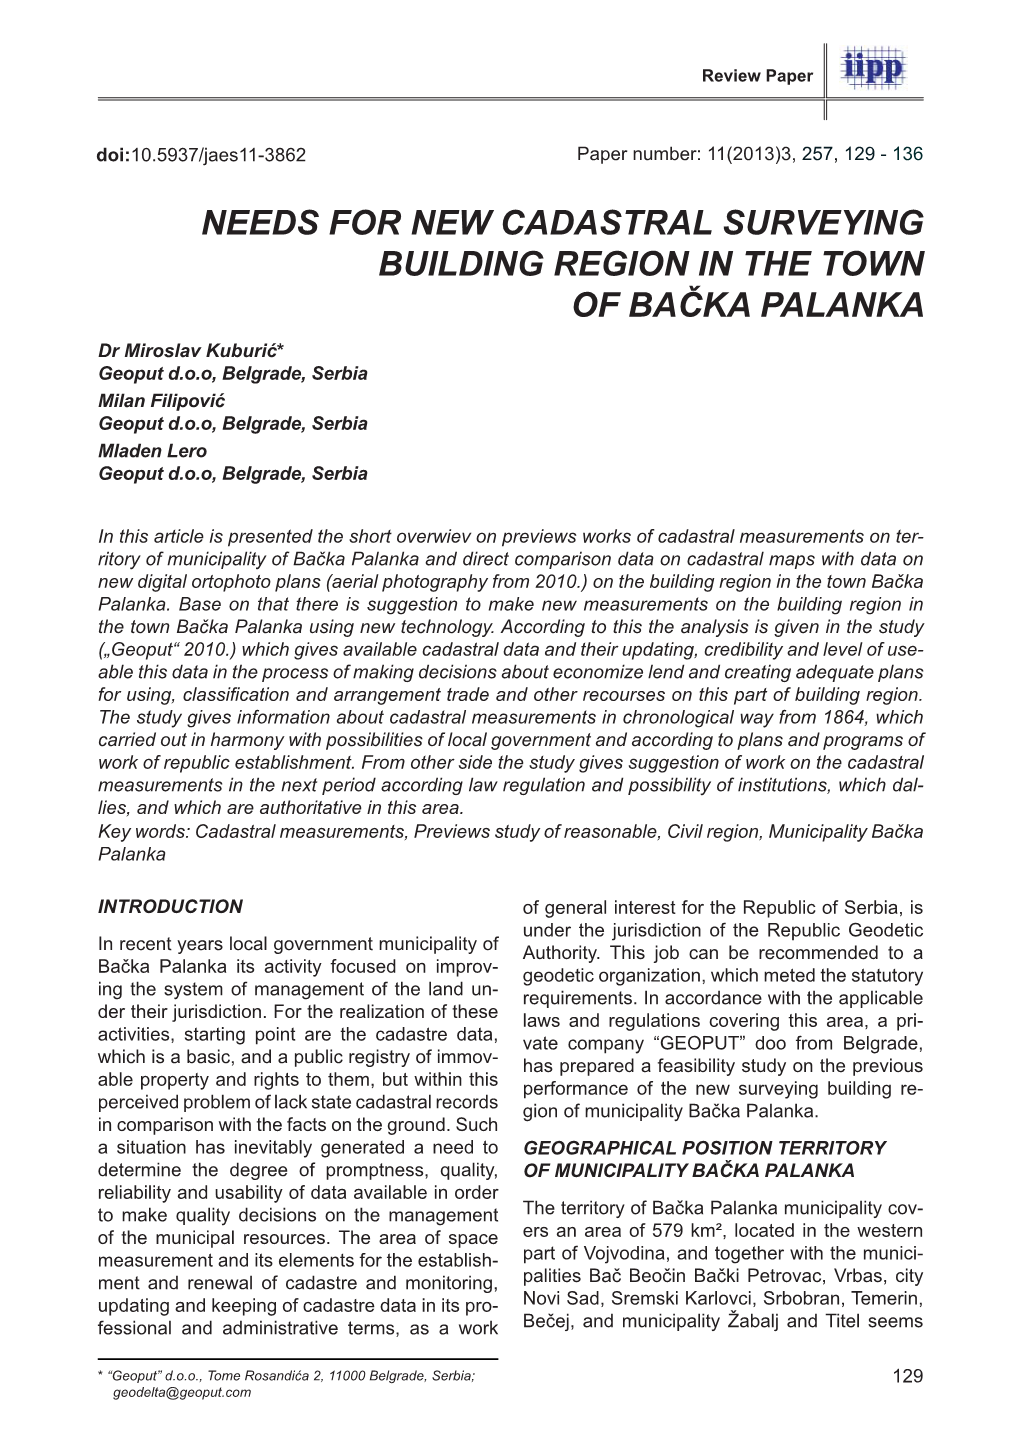 Needs for New Cadastral Surveying Building Region